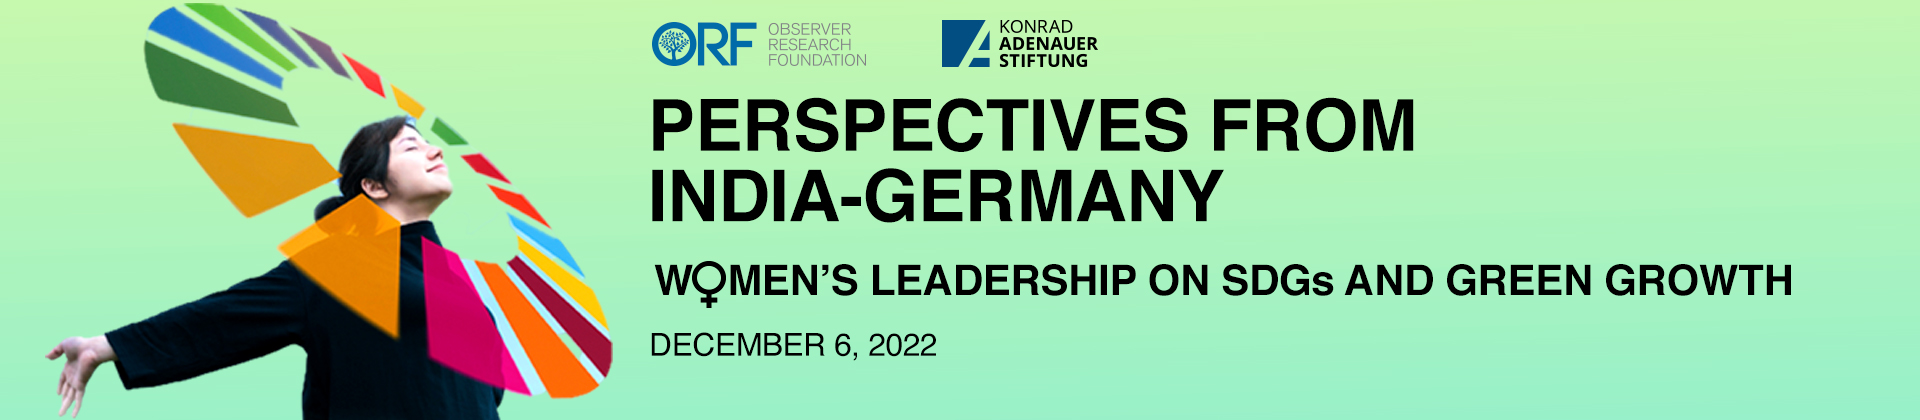 Roundtable Discussion | Perspectives from India-Germany: Women's Leadership on SDGs and Green Growth